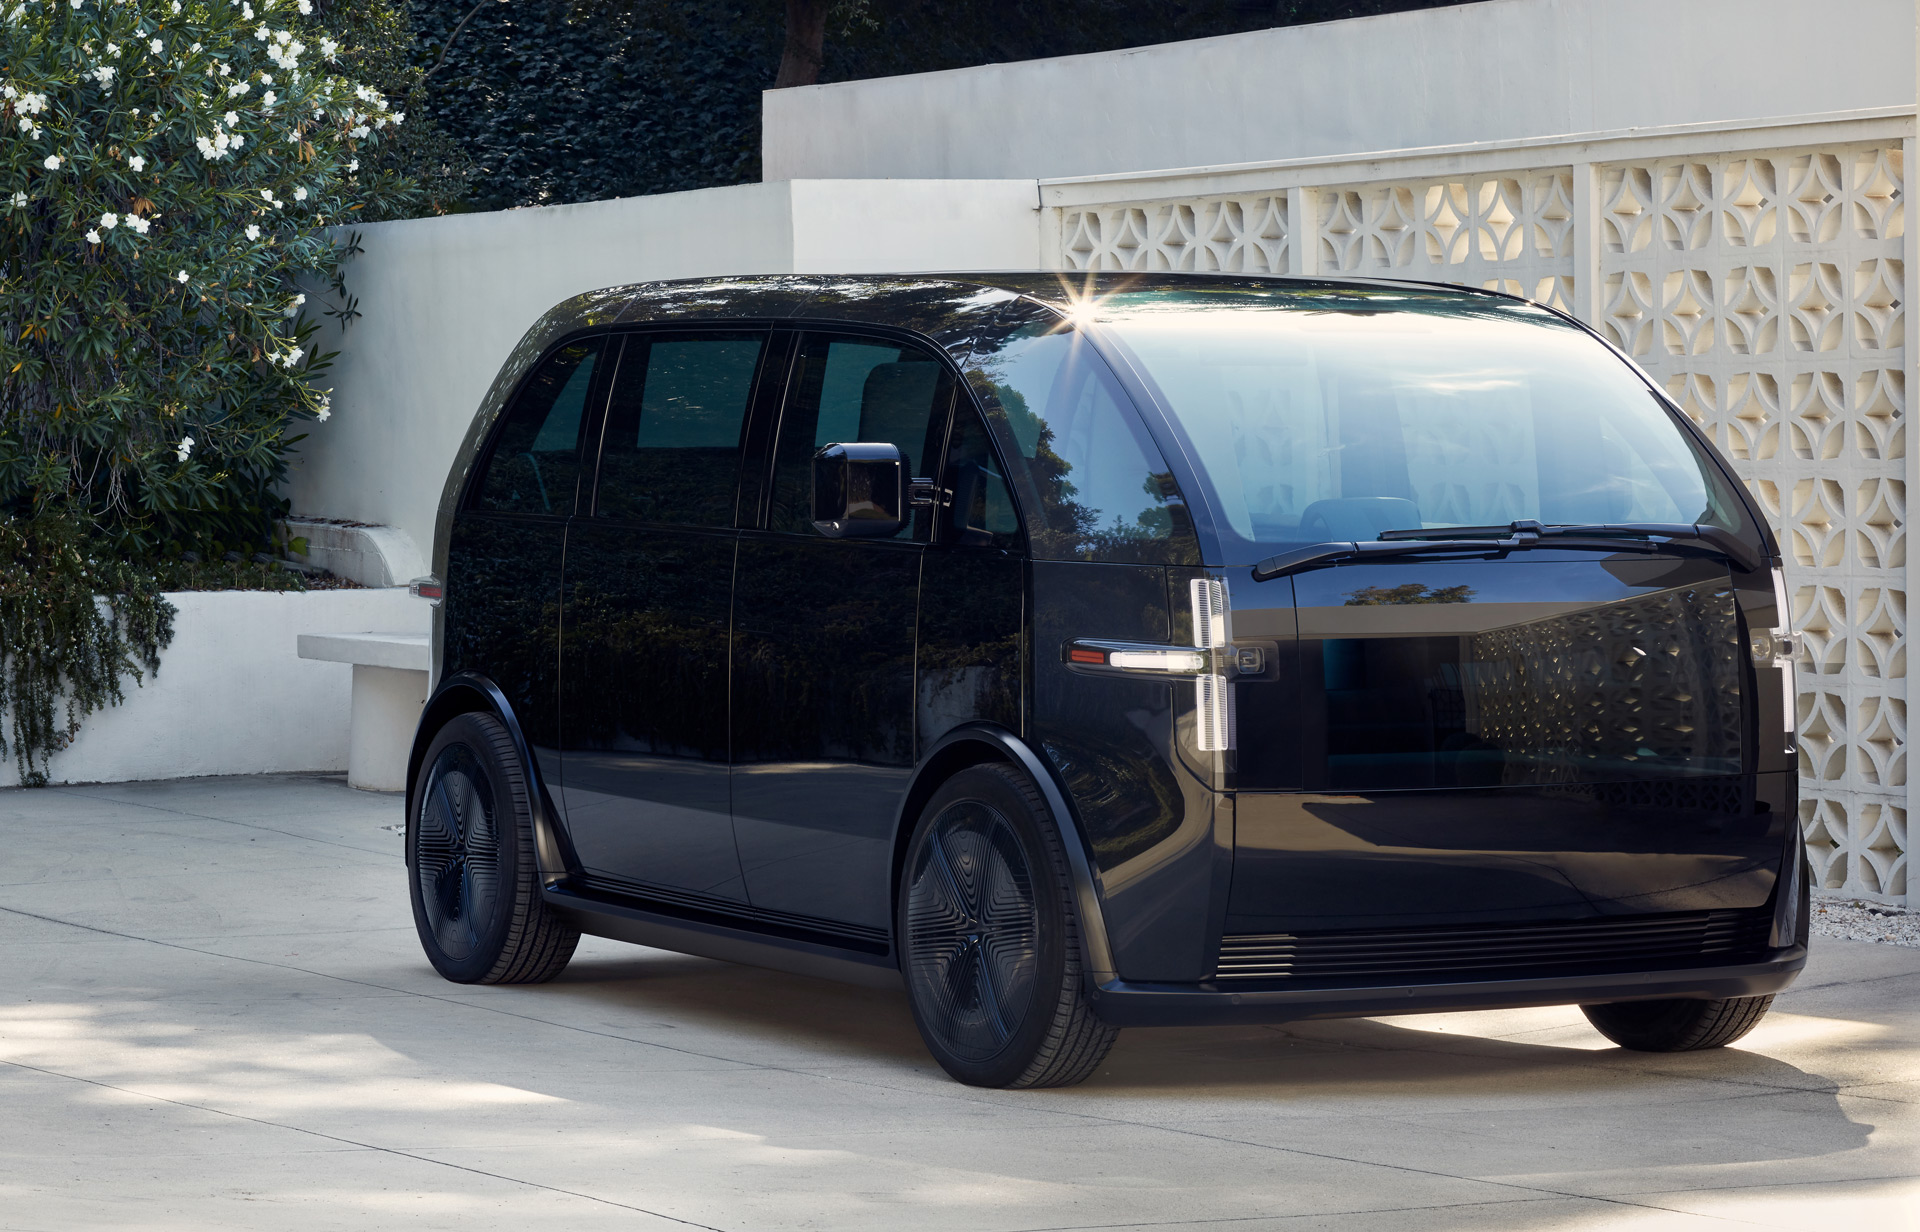 Meet Canoo: The Adorable Electric Car Set to Launch in 2021